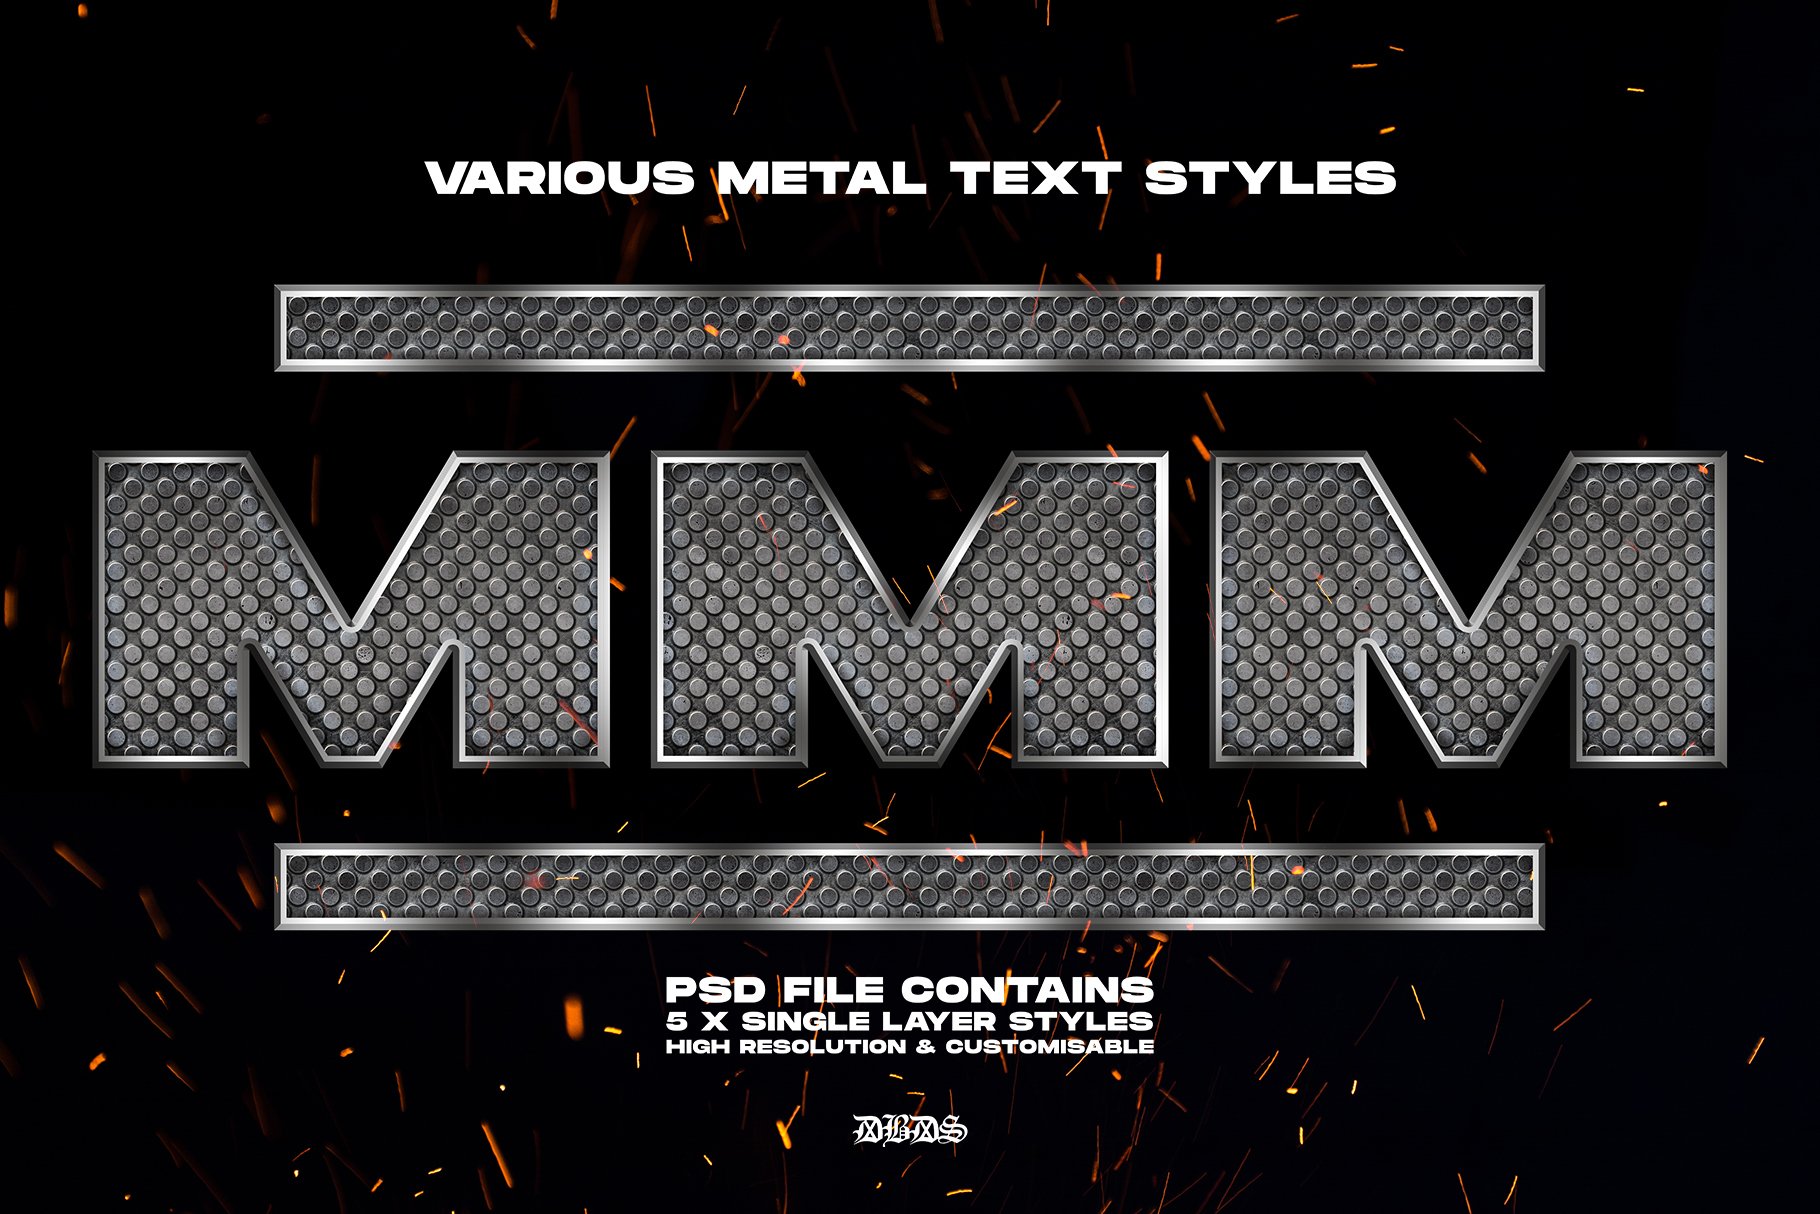 5x Metal Chrome Text Stylescover image.